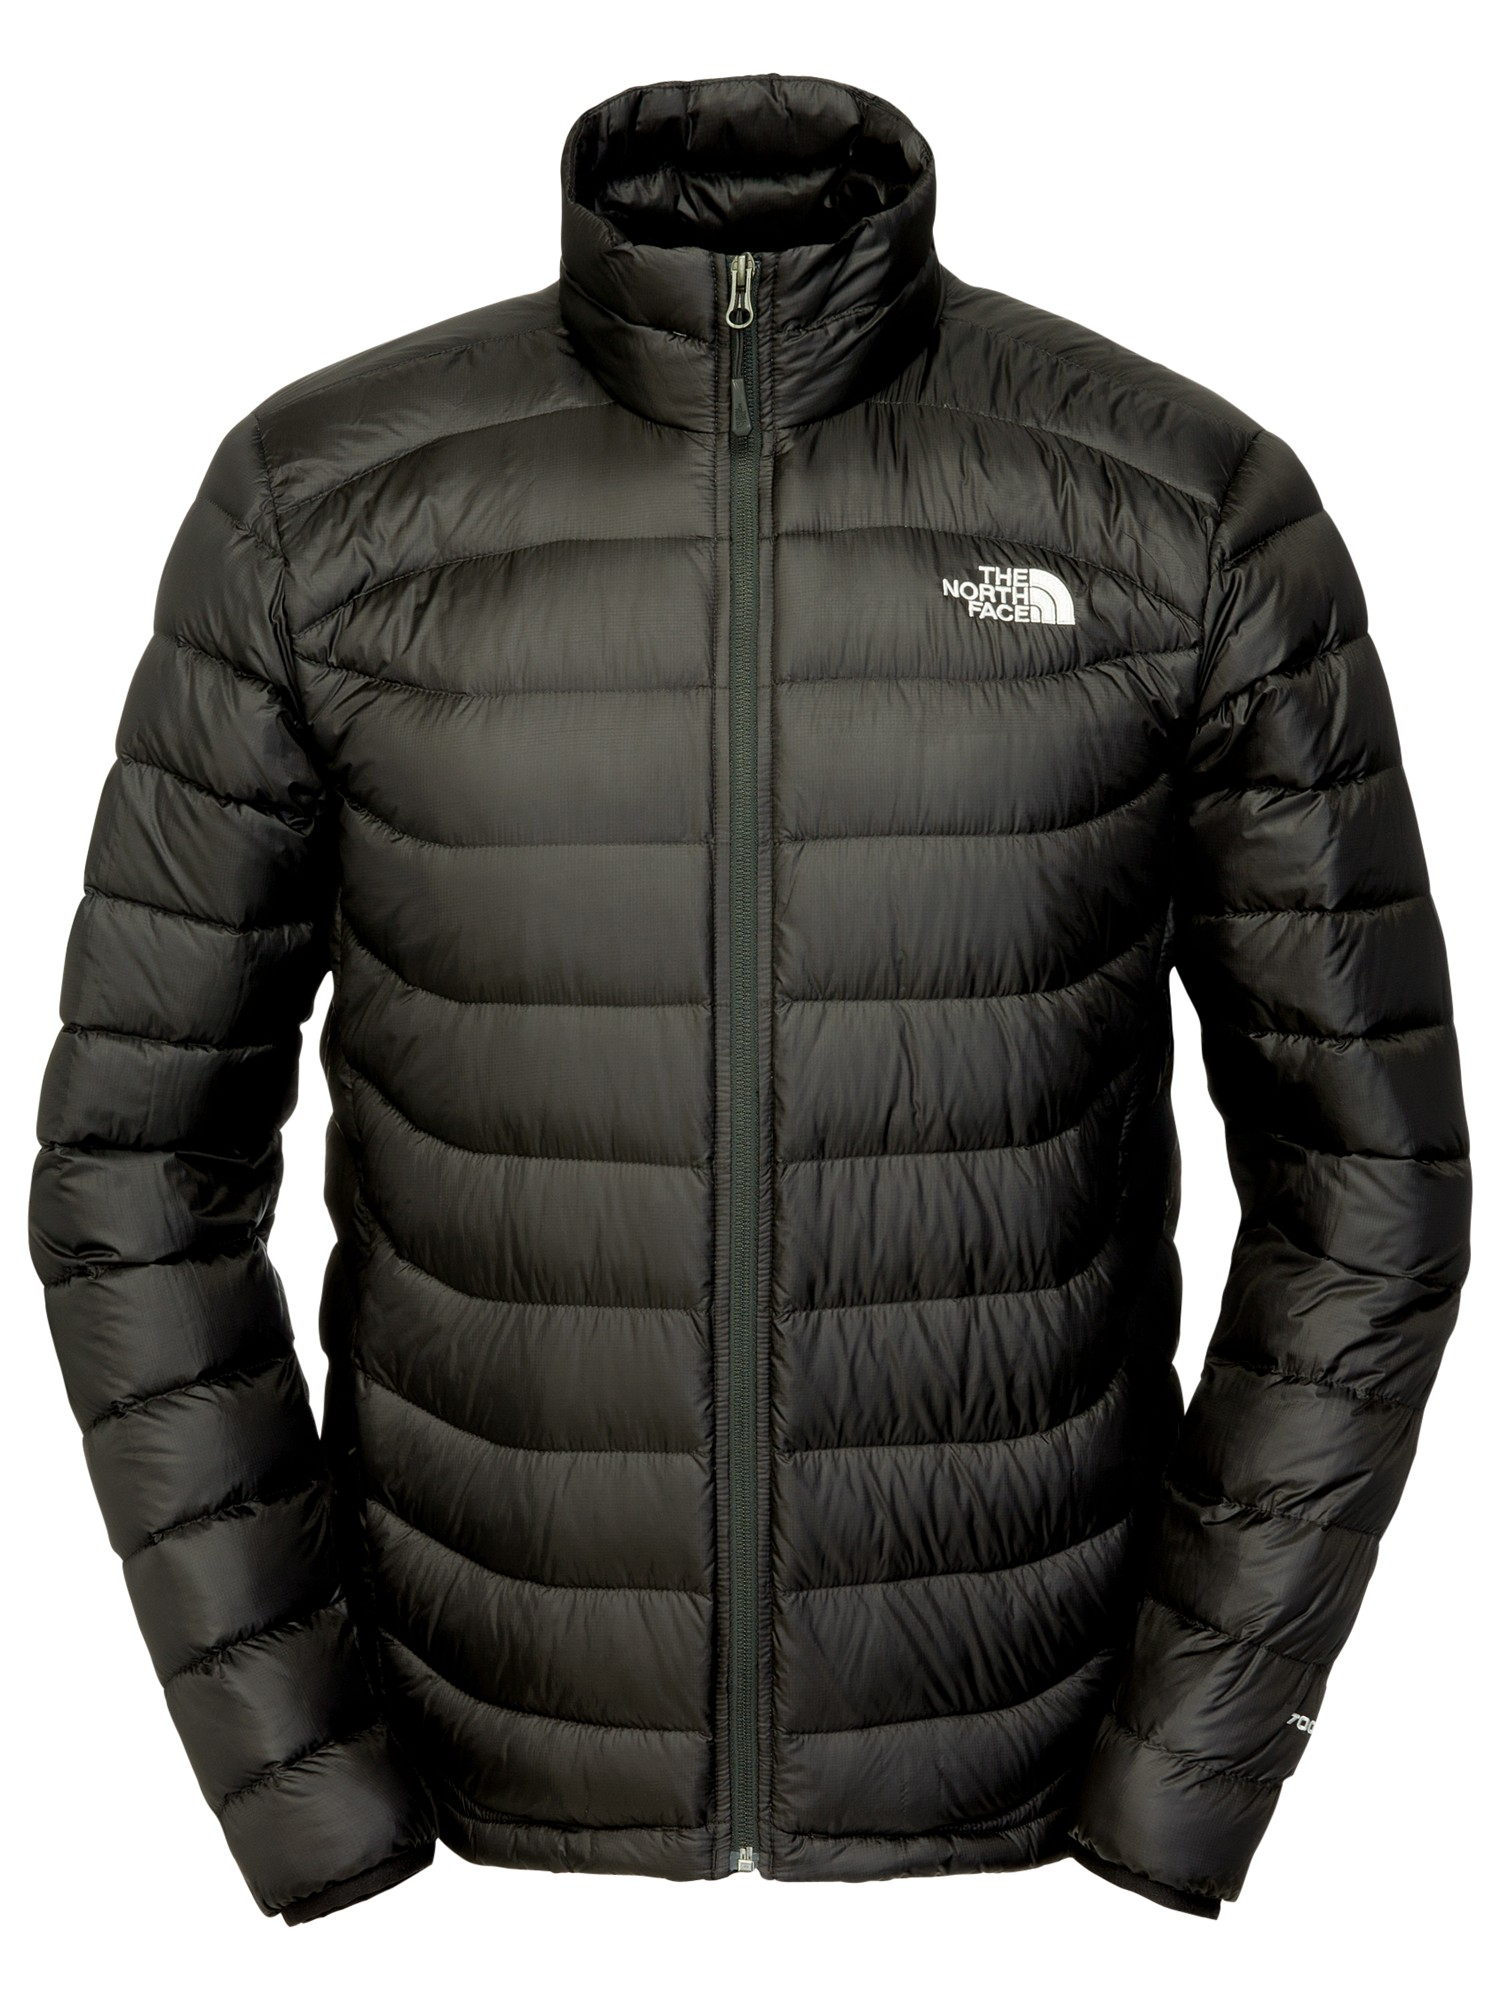 The North Face Goose Imbabra Quilted Jacket in Black for Men - Lyst